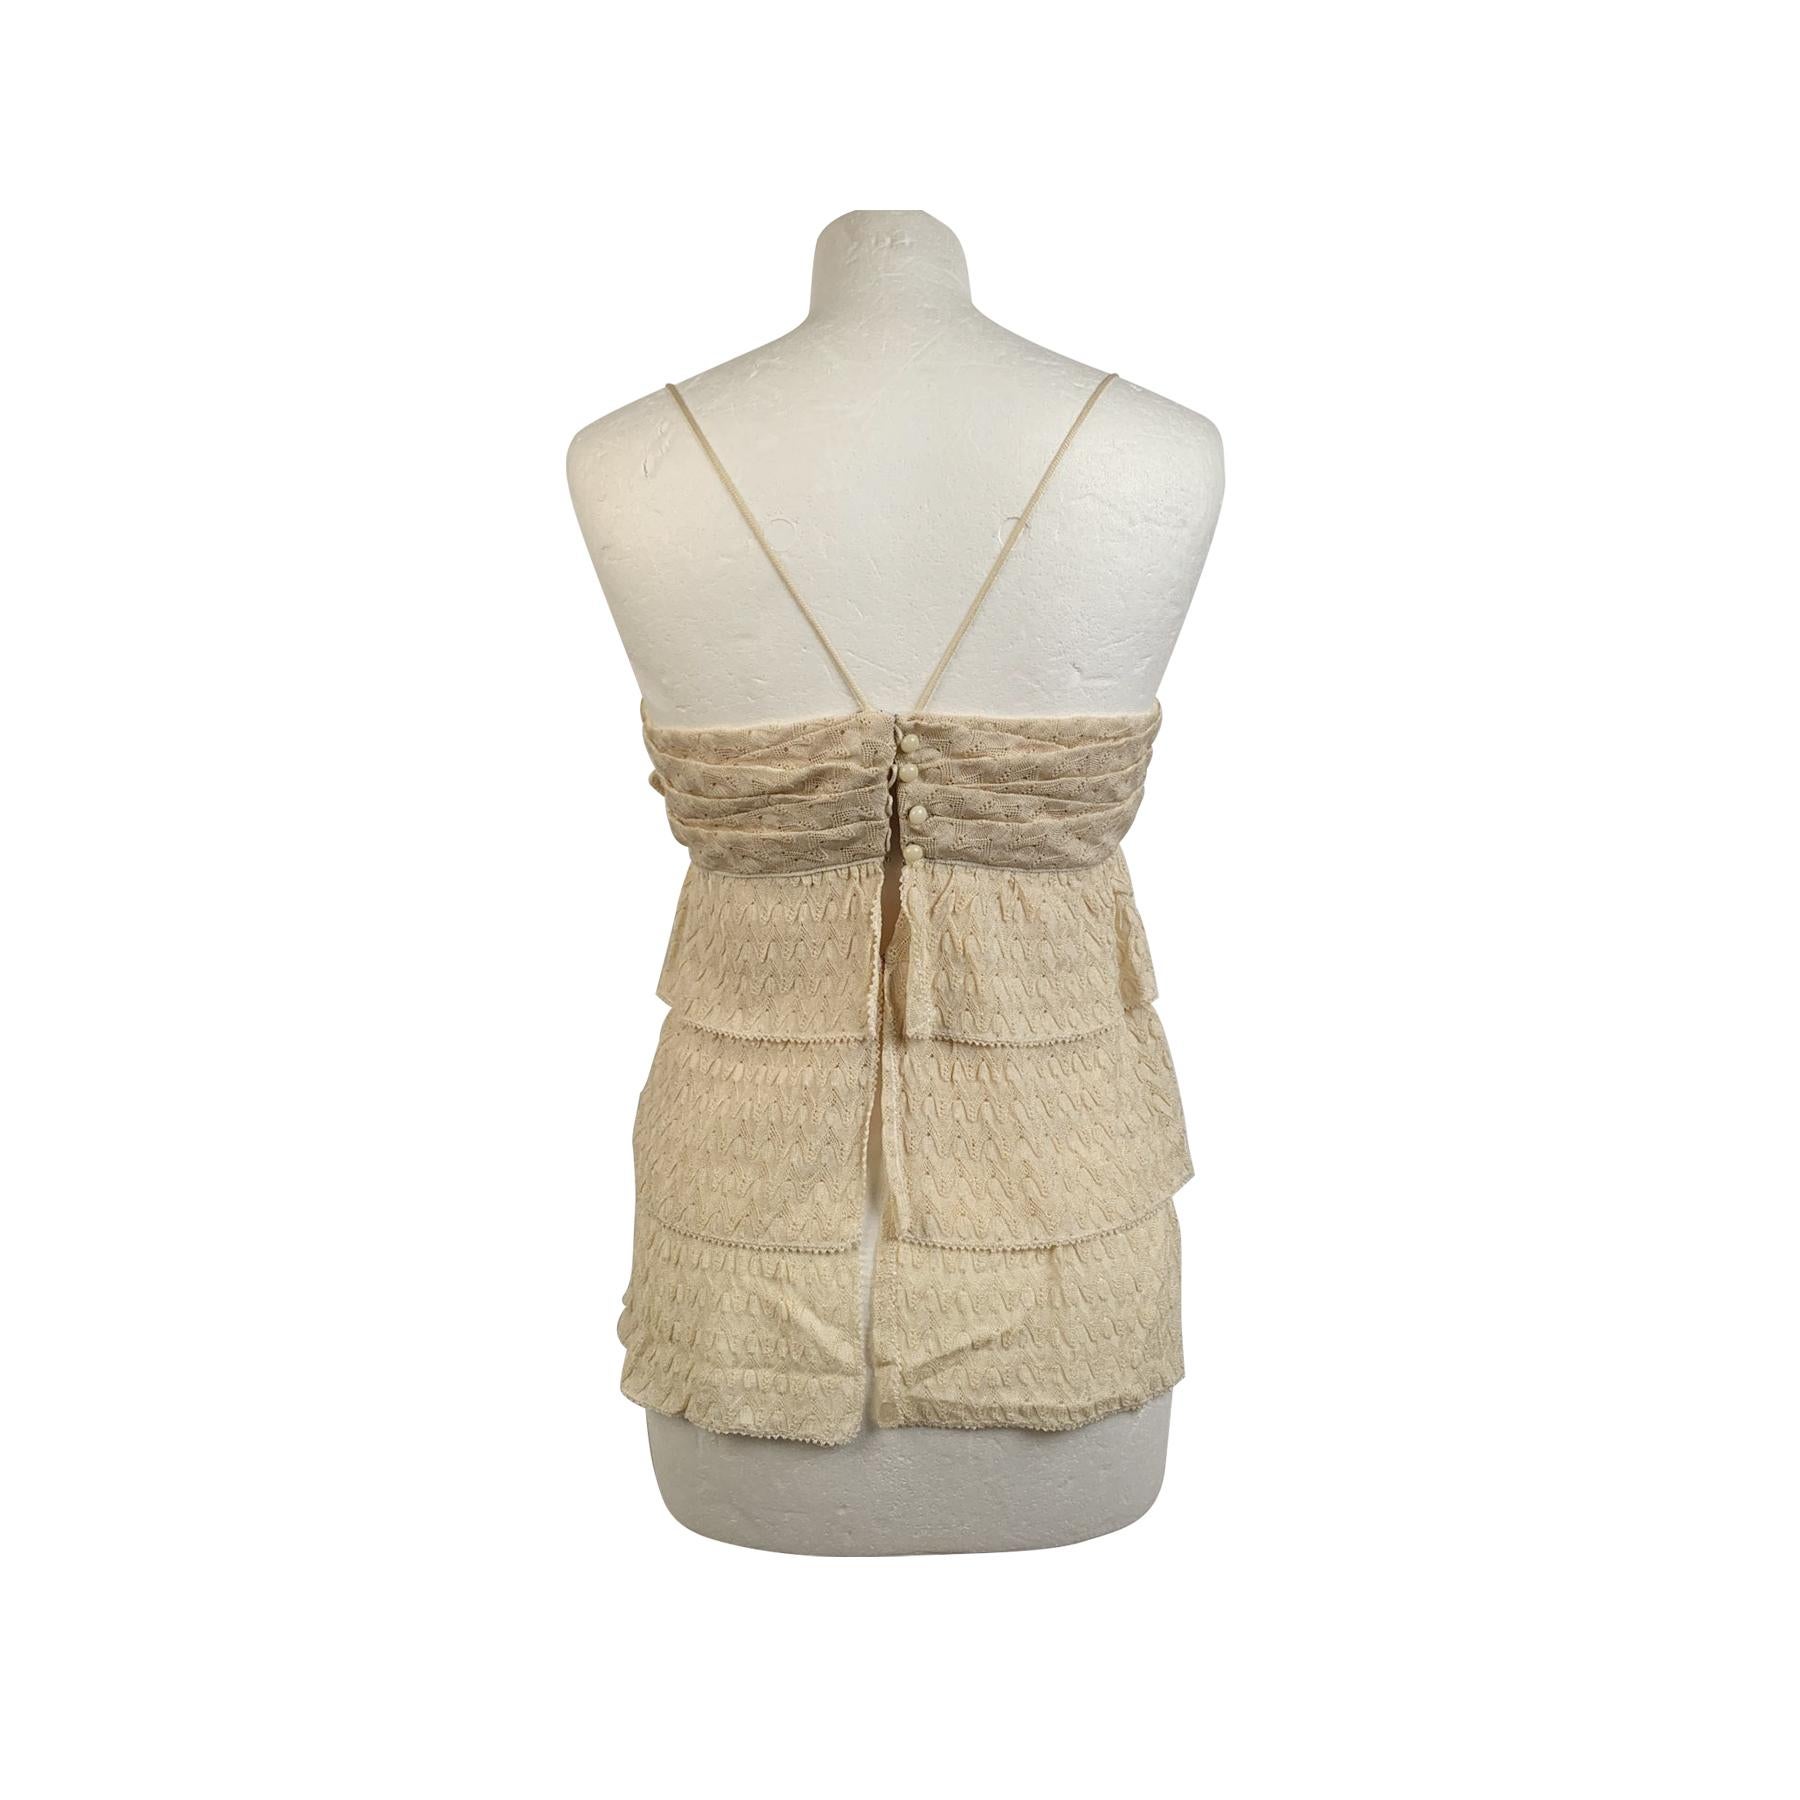 Missoni ivory viscose top. It features spaghetti strap. , flower application on the front, tiered design, button closure and hook and eyes on the back, Made in Italy. Size: 42 IT (The size shown for this item is the size indicated by the designer on